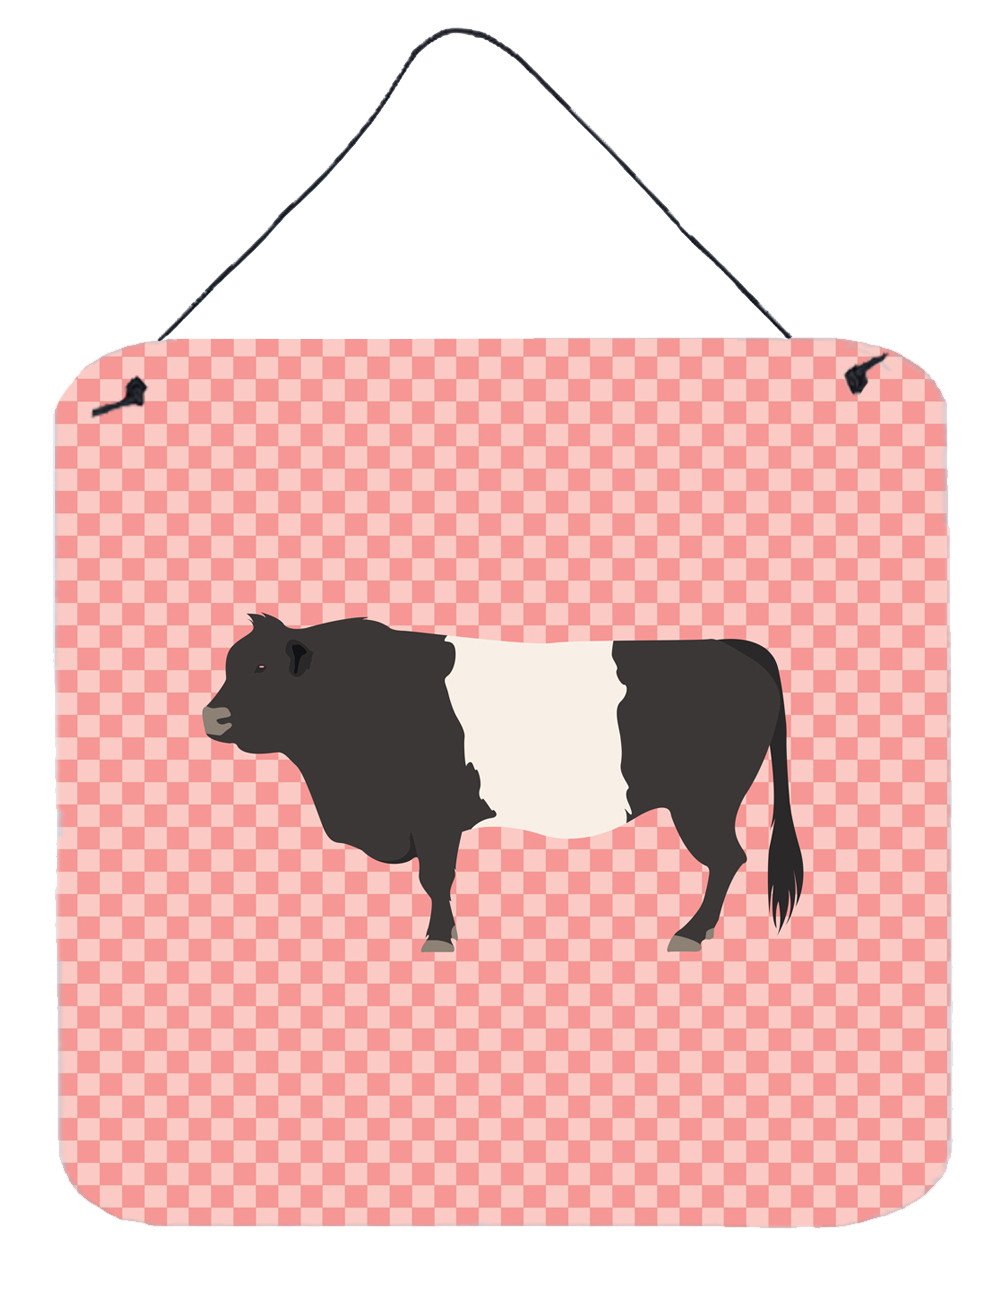 Belted Galloway Cow Pink Check Wall or Door Hanging Prints BB7831DS66 by Caroline's Treasures